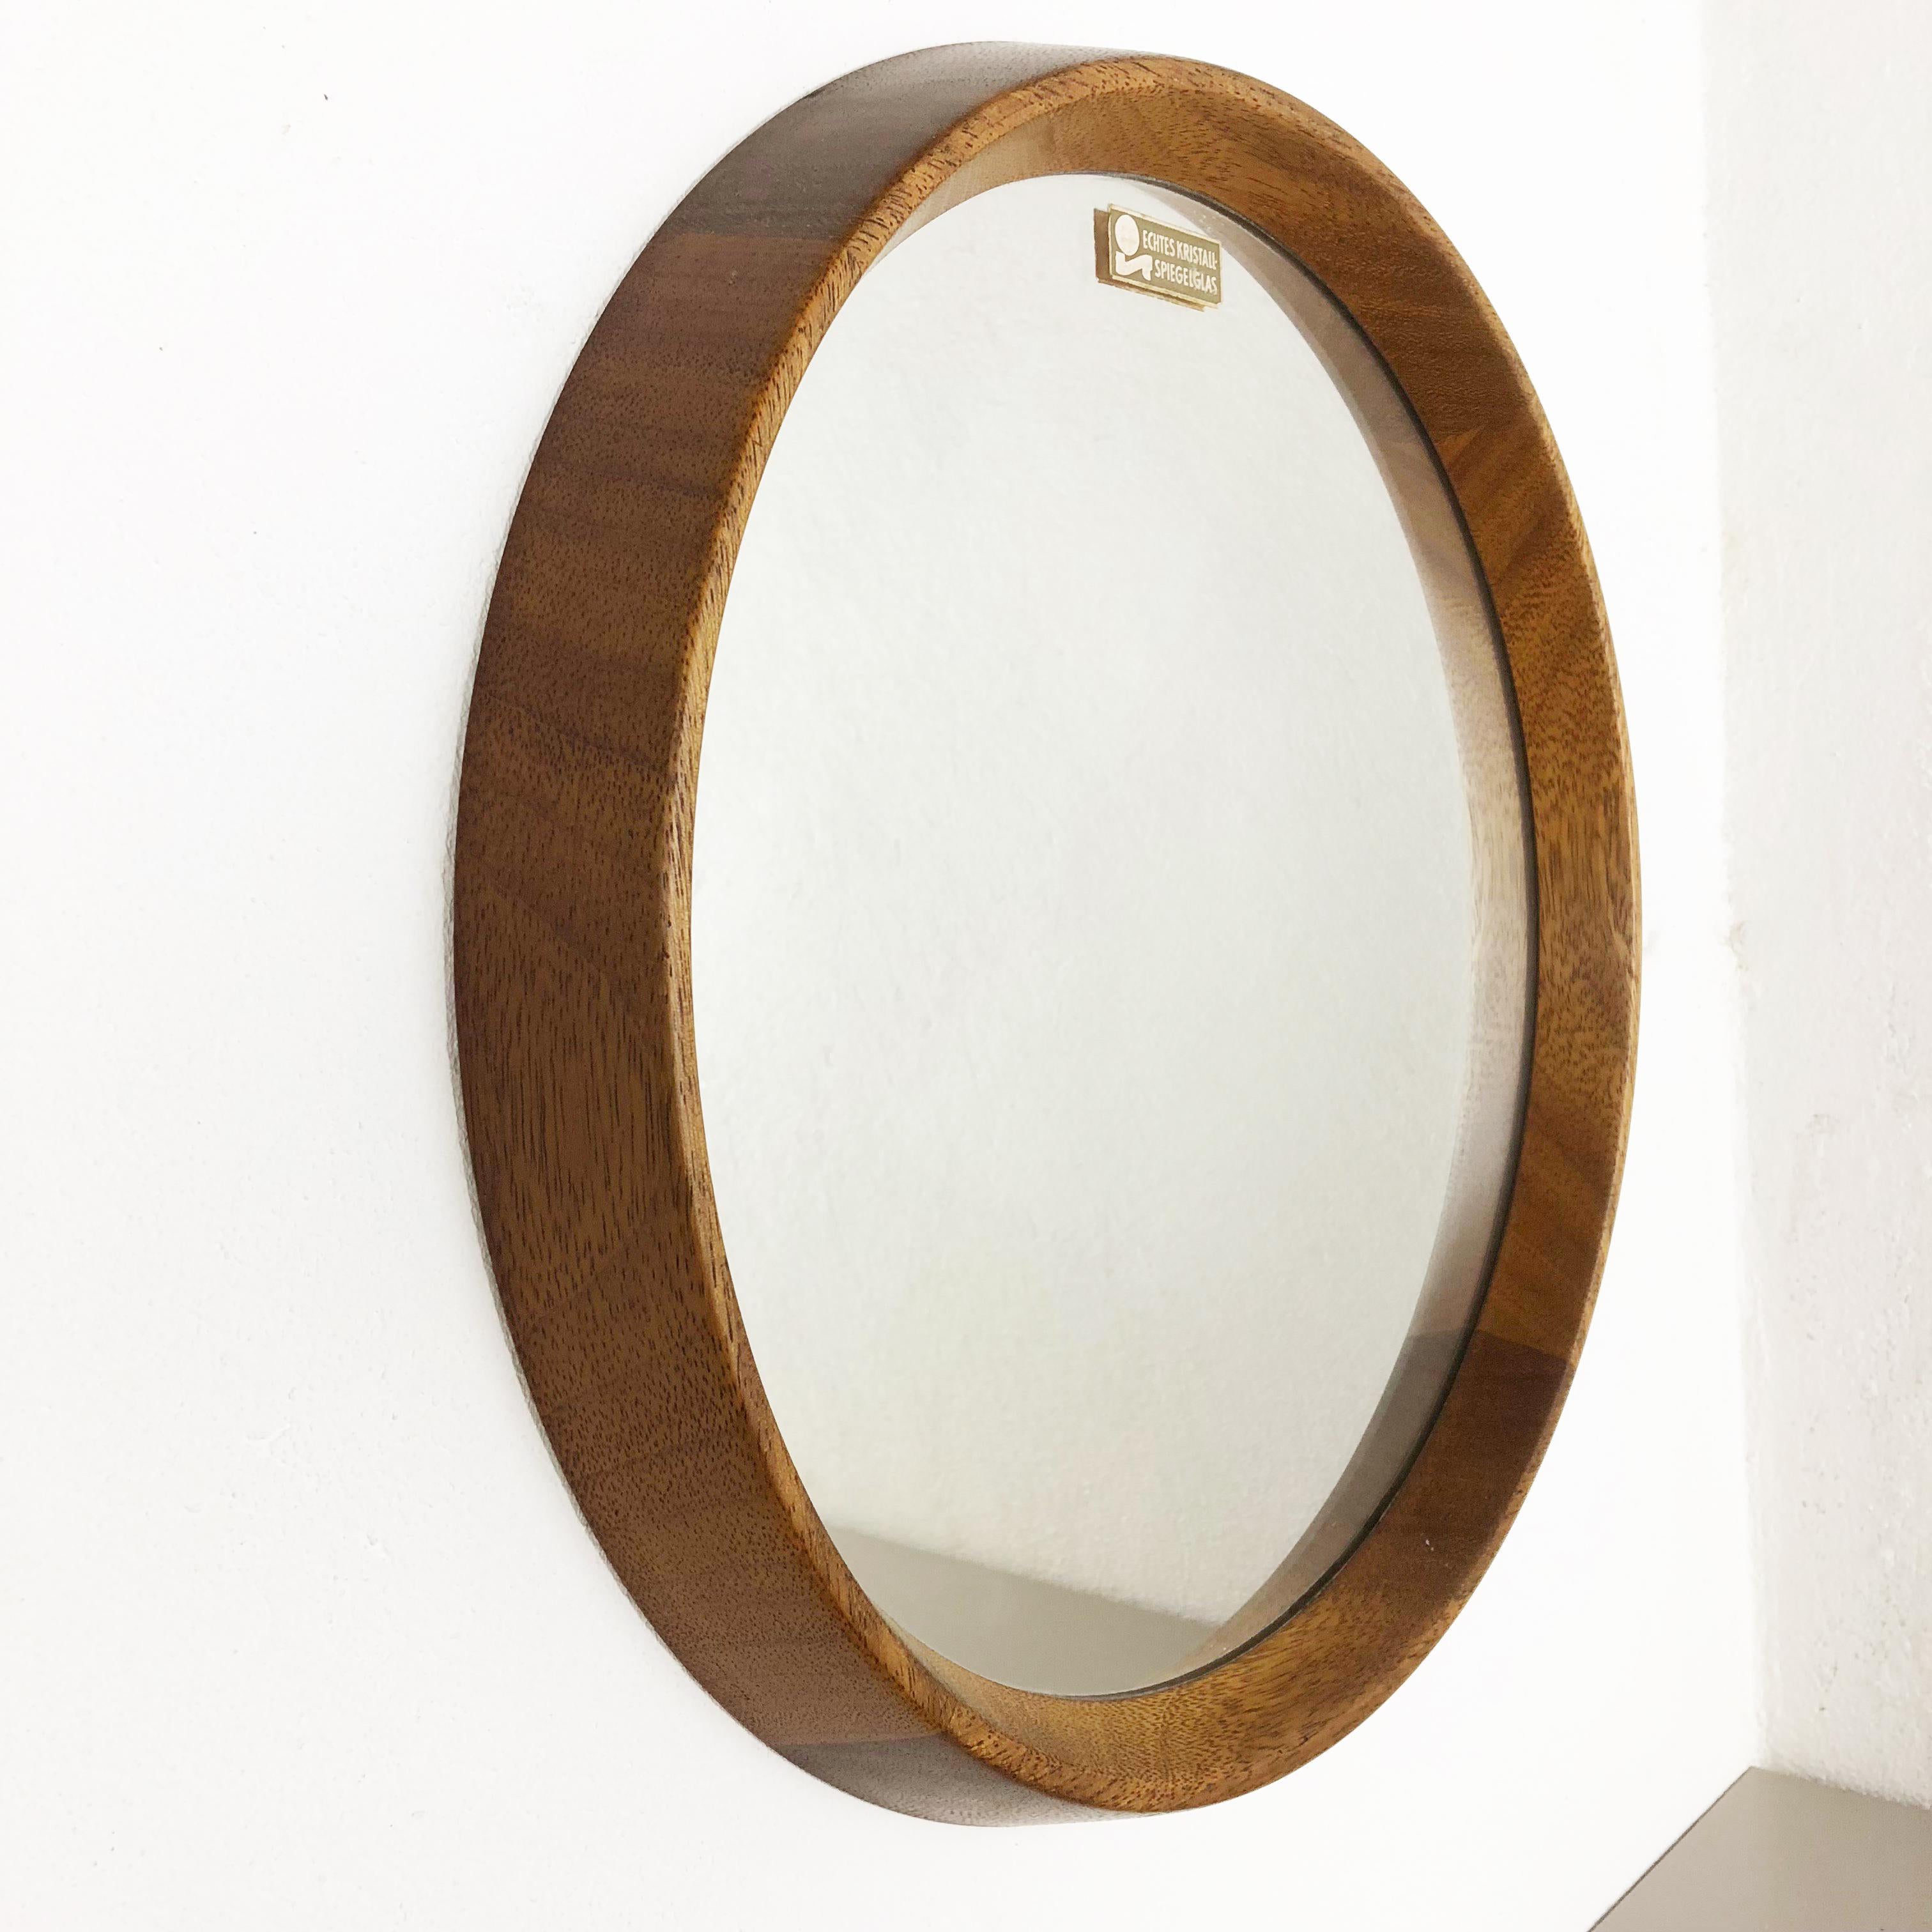 Mid-Century Modern NOS! Original 1960s Crystal Glass and Oakwood Mirror, Made in Germany Nr. 2 For Sale